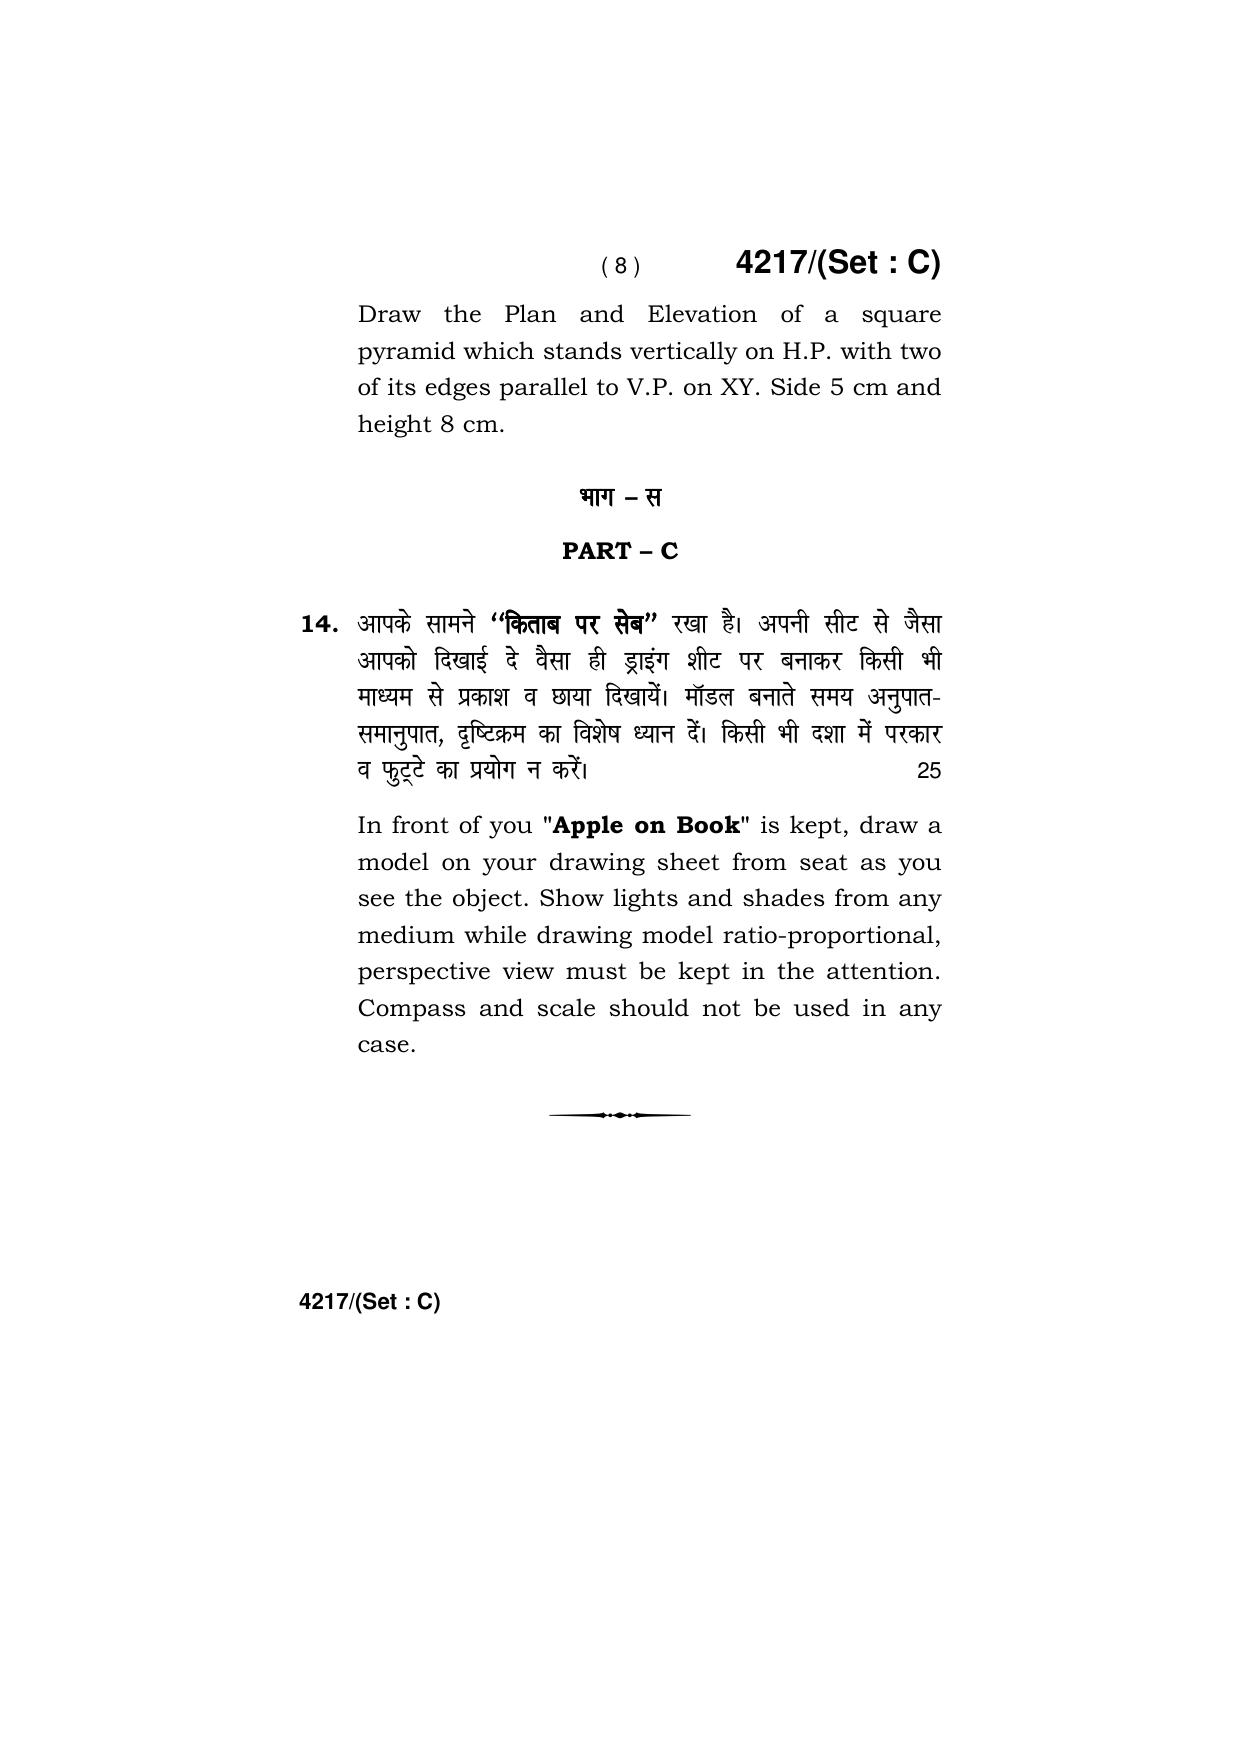 Haryana Board HBSE Class 10 Drawing (All Set) 2019 Question Paper - Page 24